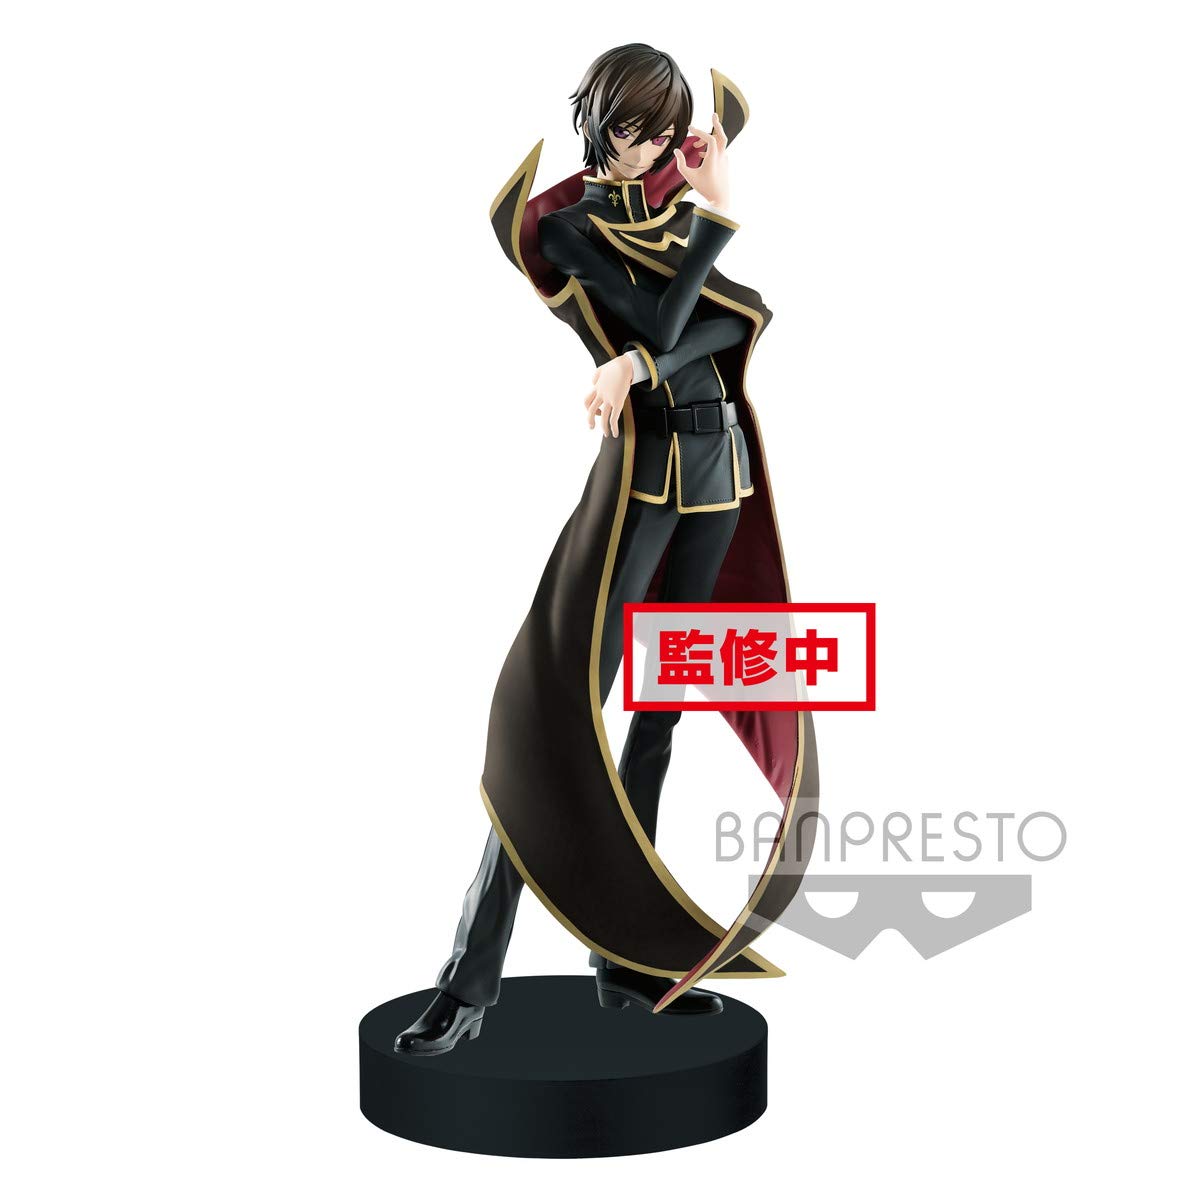 Lelouch Lamperouge ver 2. , EXQ Figure, Code Geass, Lelouch of the Rebellion, Banpresto